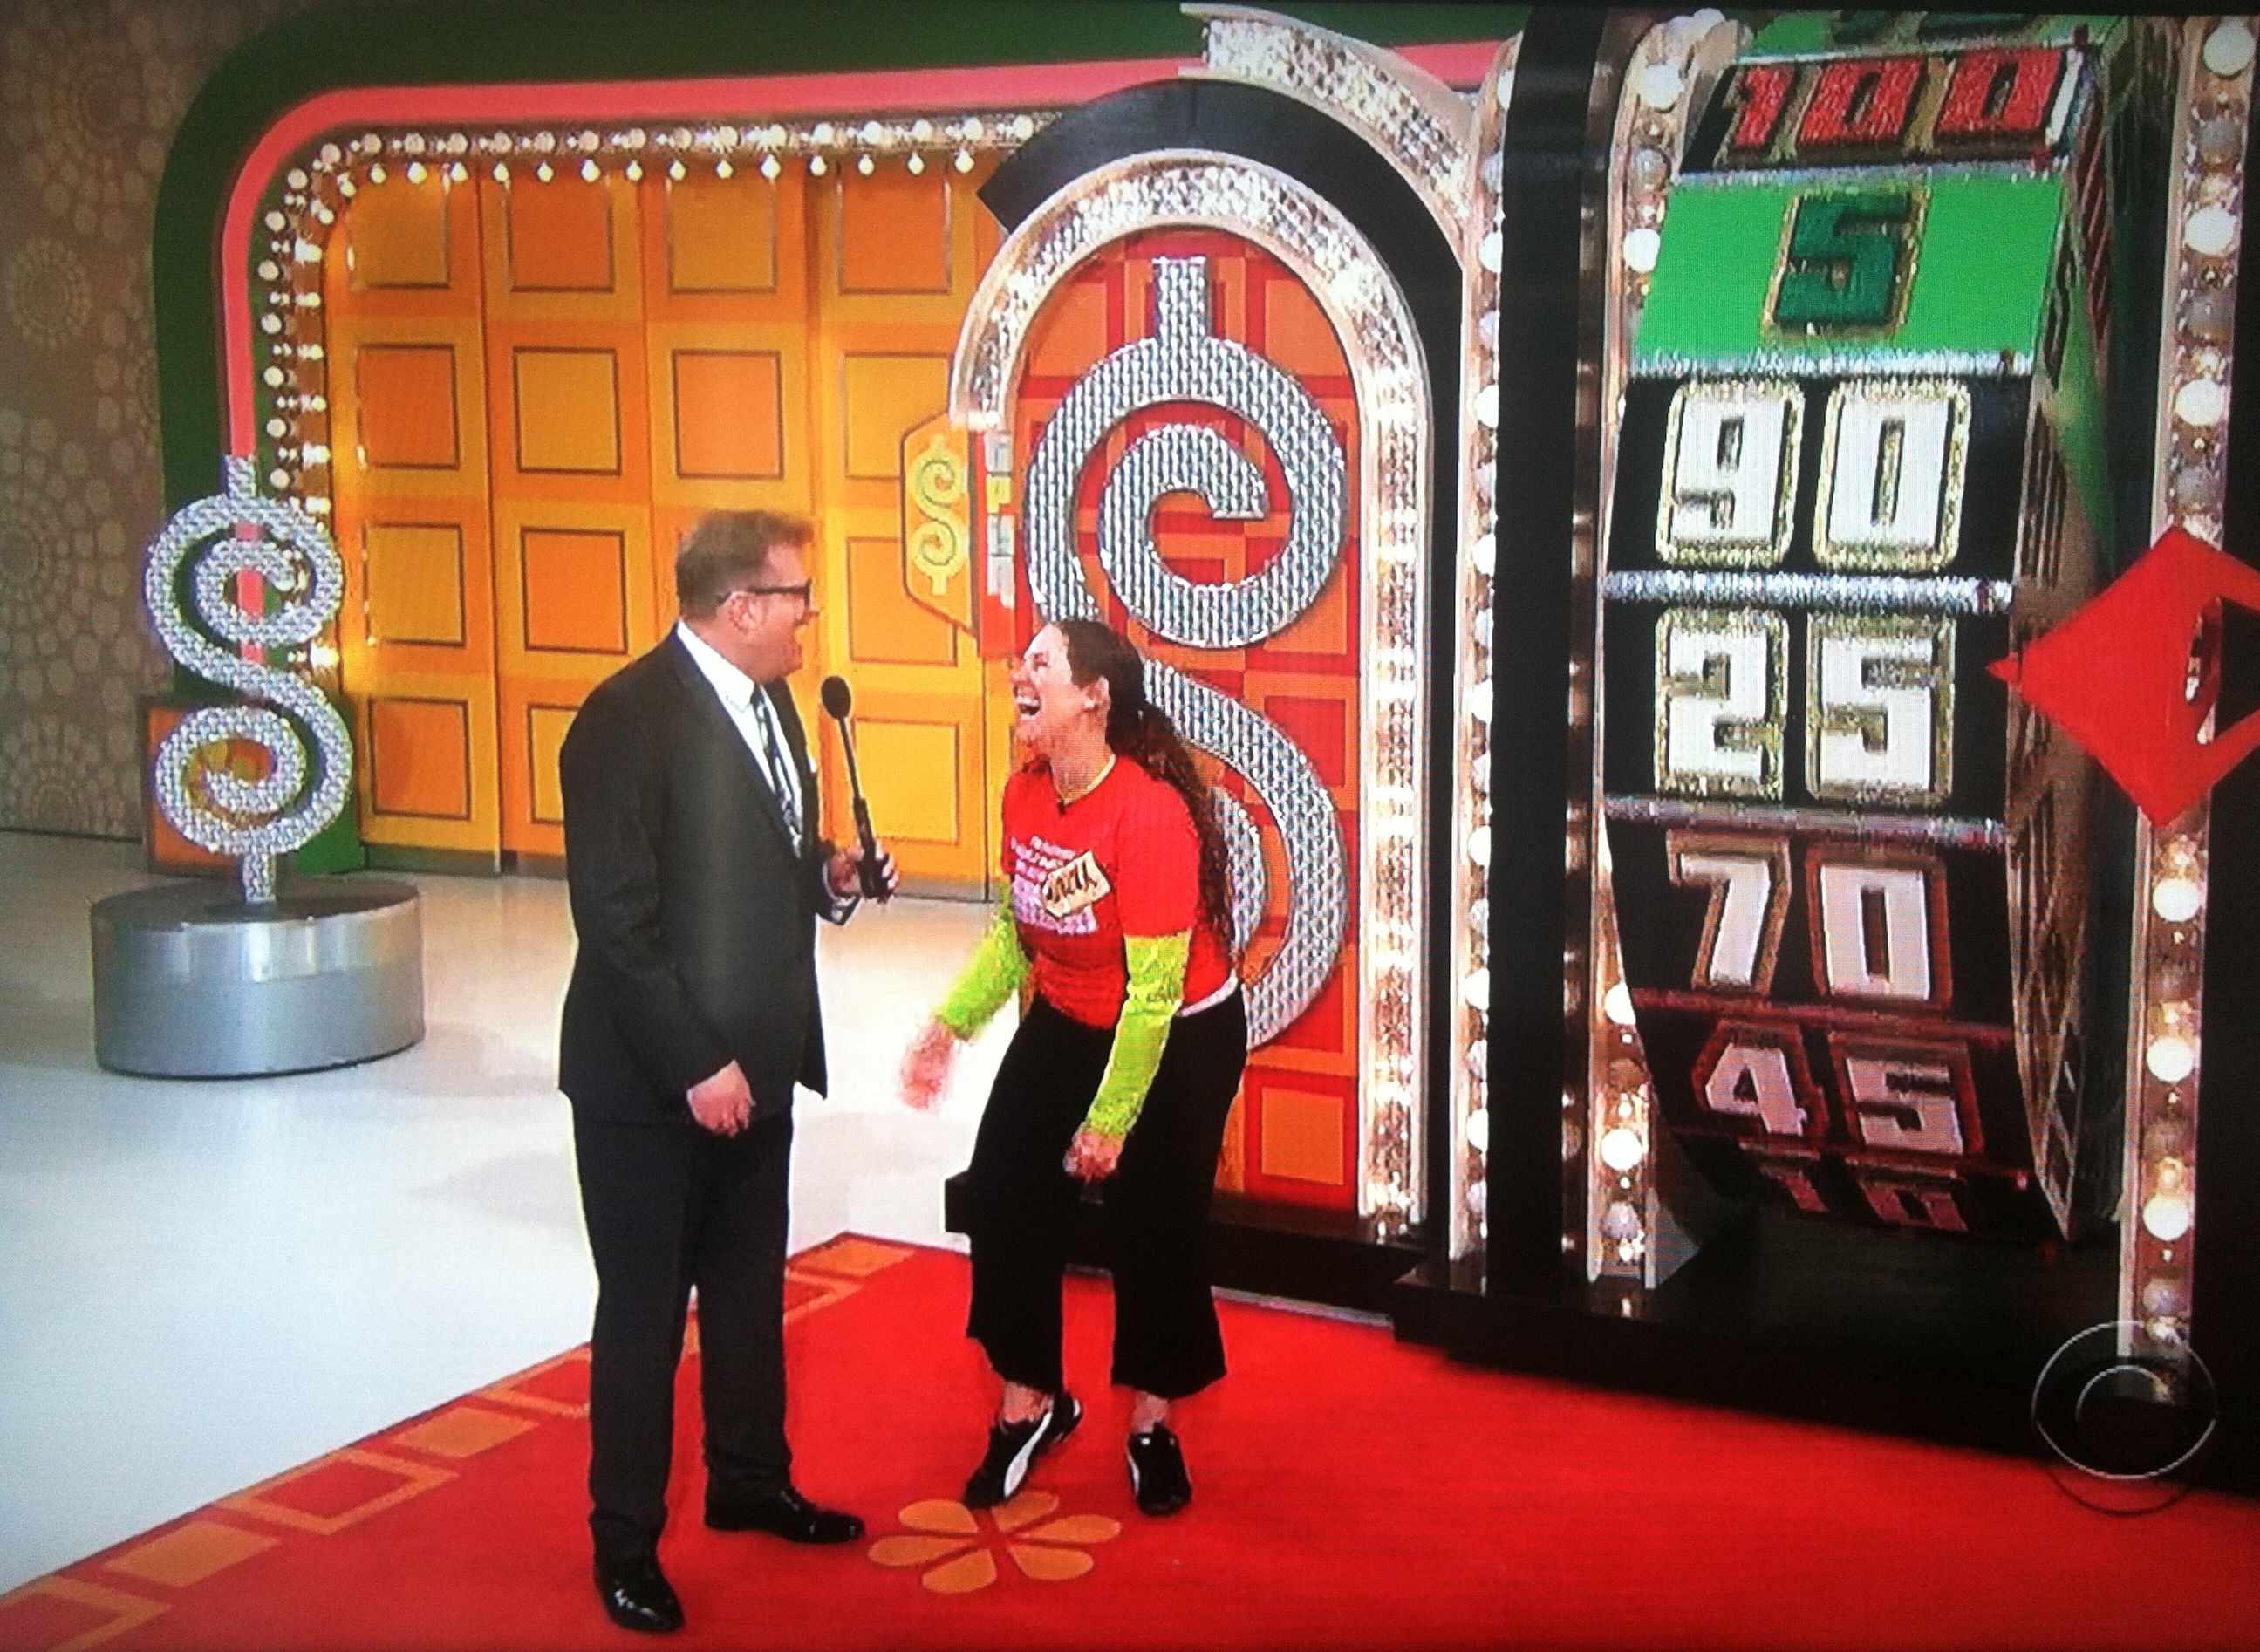 Aurora De Lucia laughing it up with Drew Carey at the wheel on The Price is Right